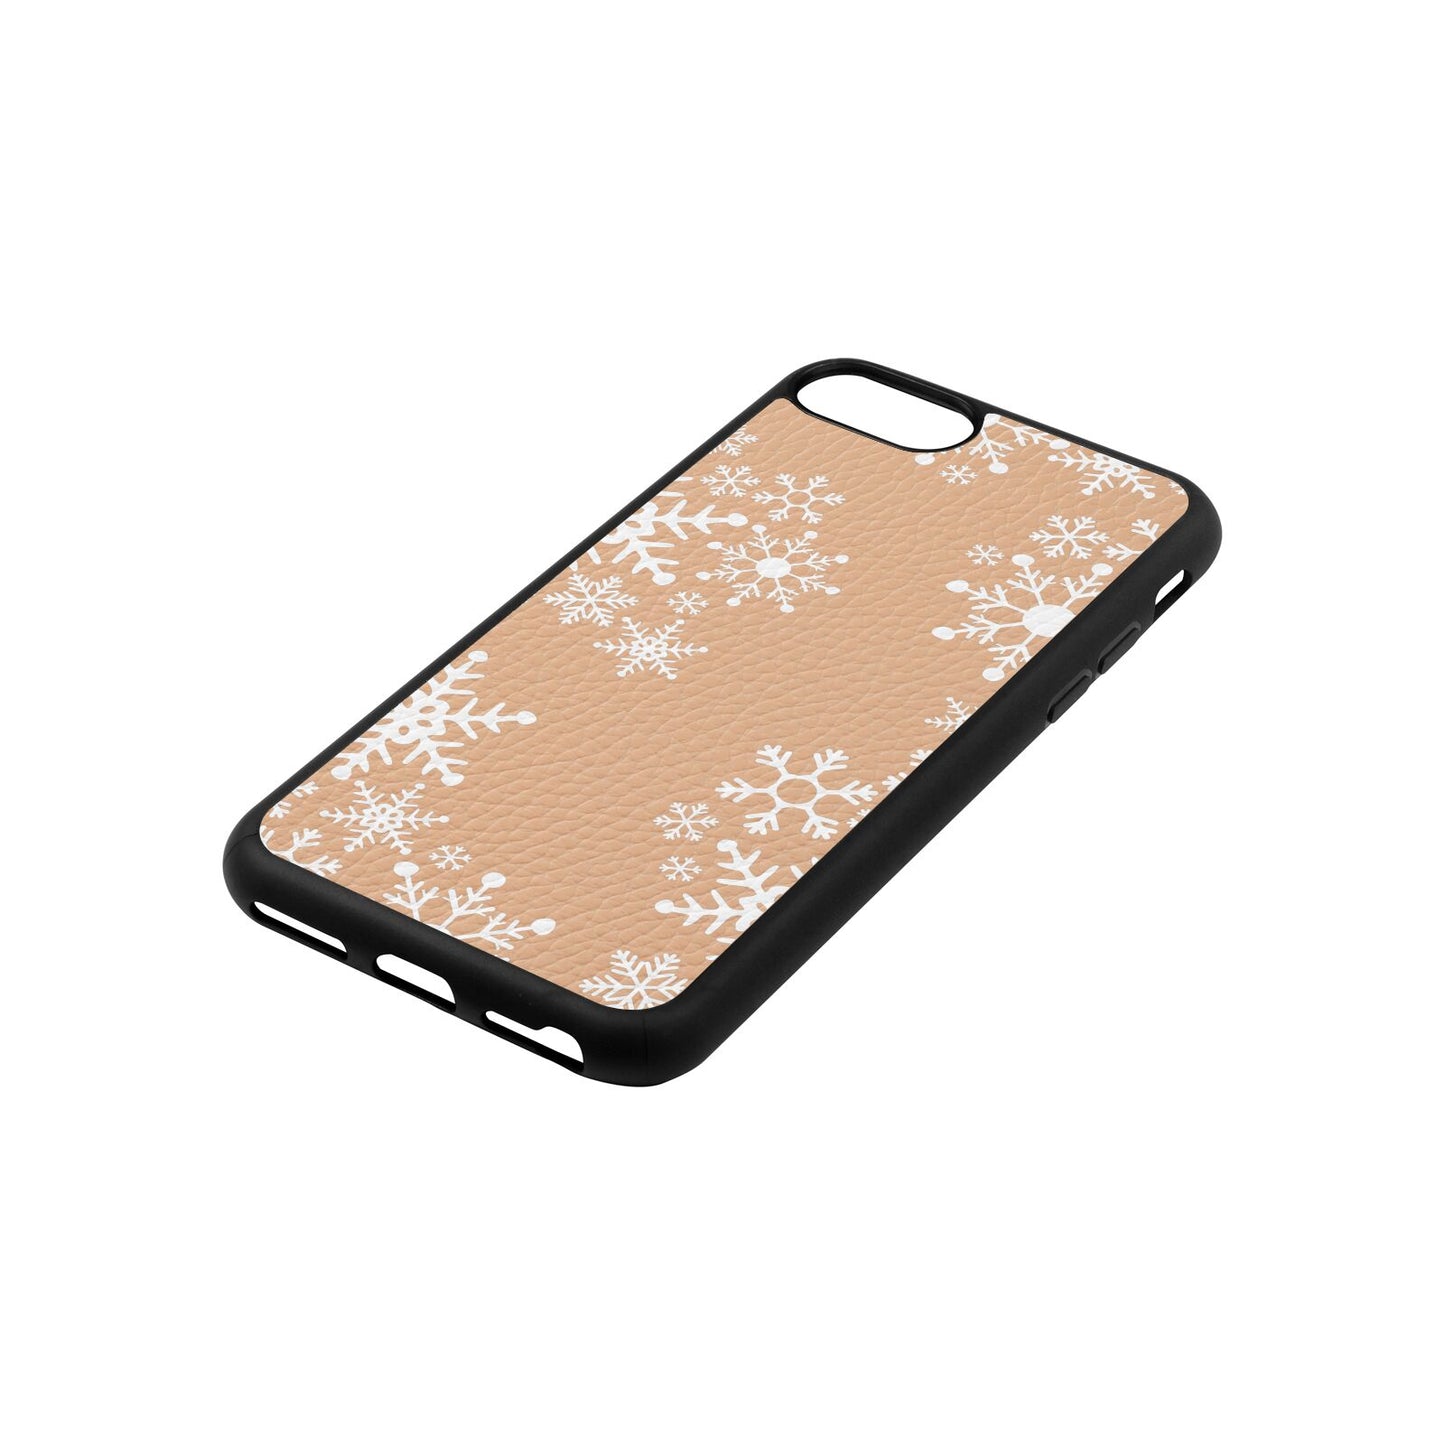 Snowflake Nude Pebble Leather iPhone 8 Case Side Angle